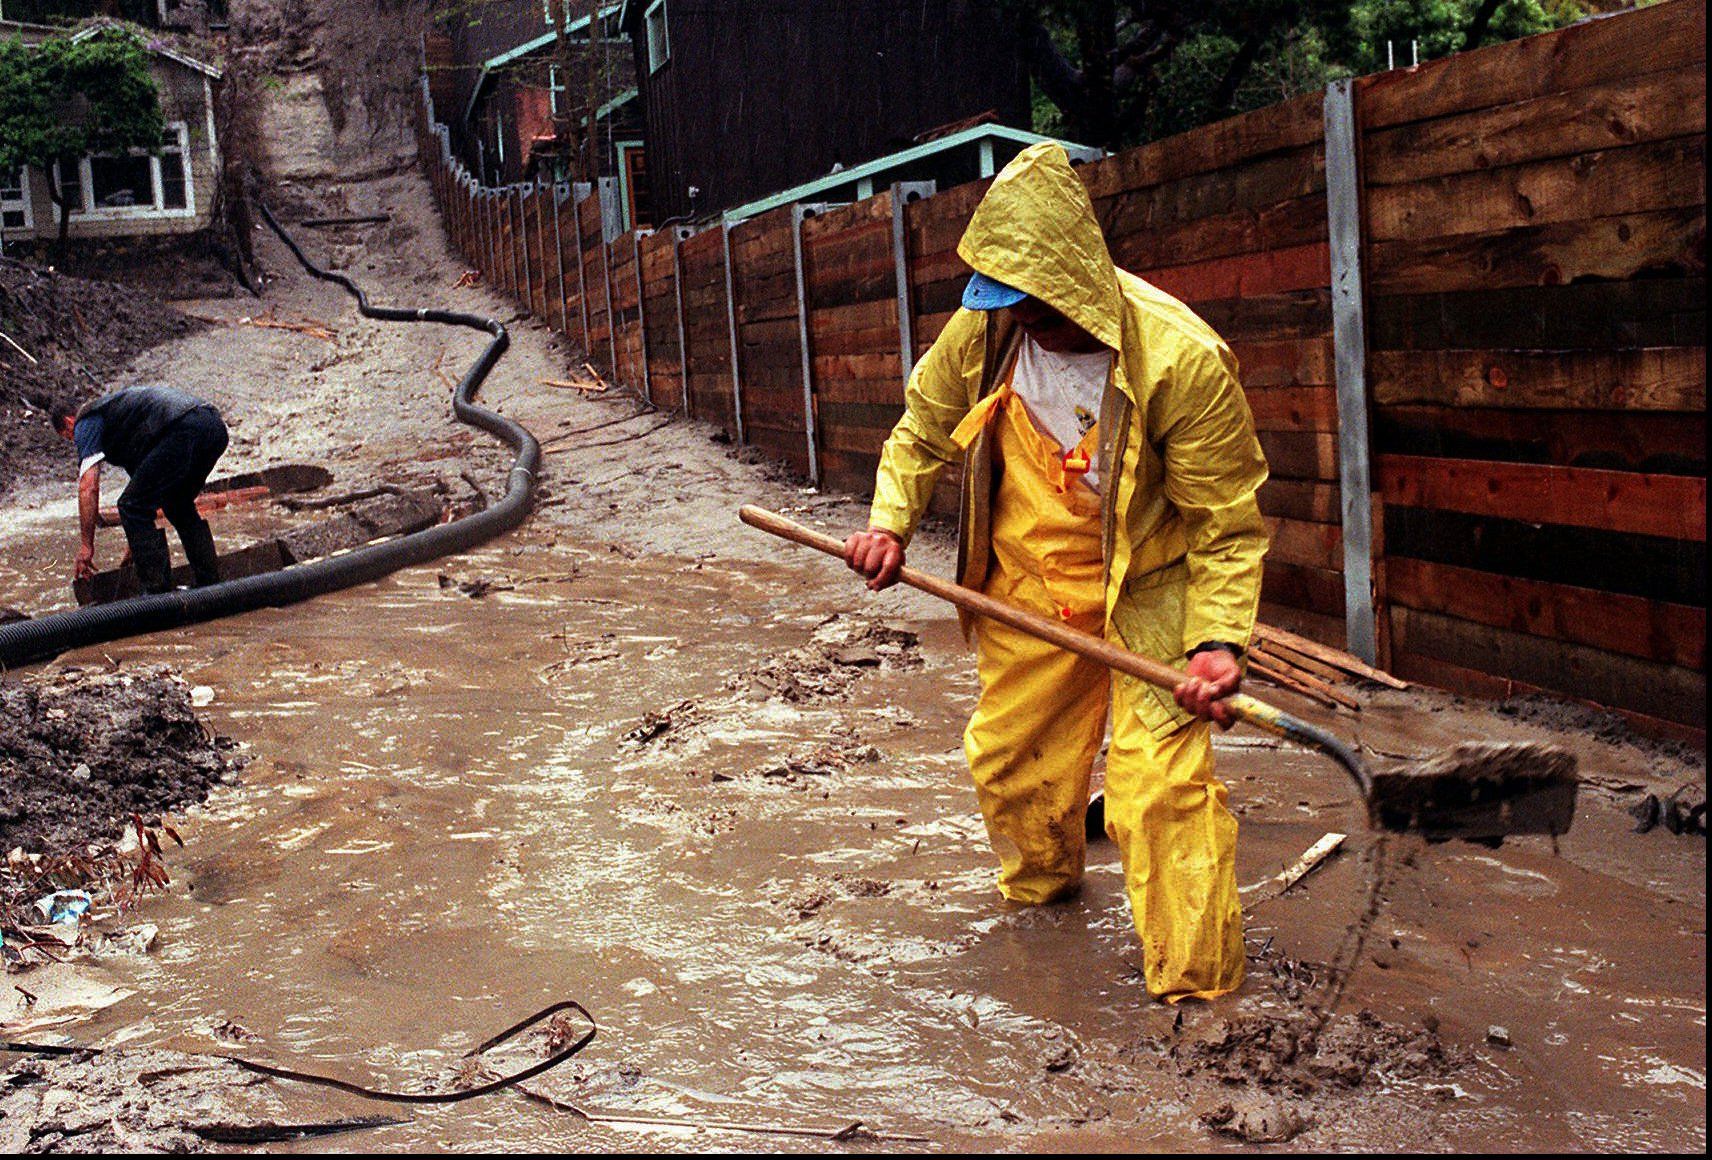 Enrique Lagunas digs a trench to redirect water toward a street in Laguna Beach, Calif., after heavy rains from an El Nino storm hit Southern California on March 25, 1998.